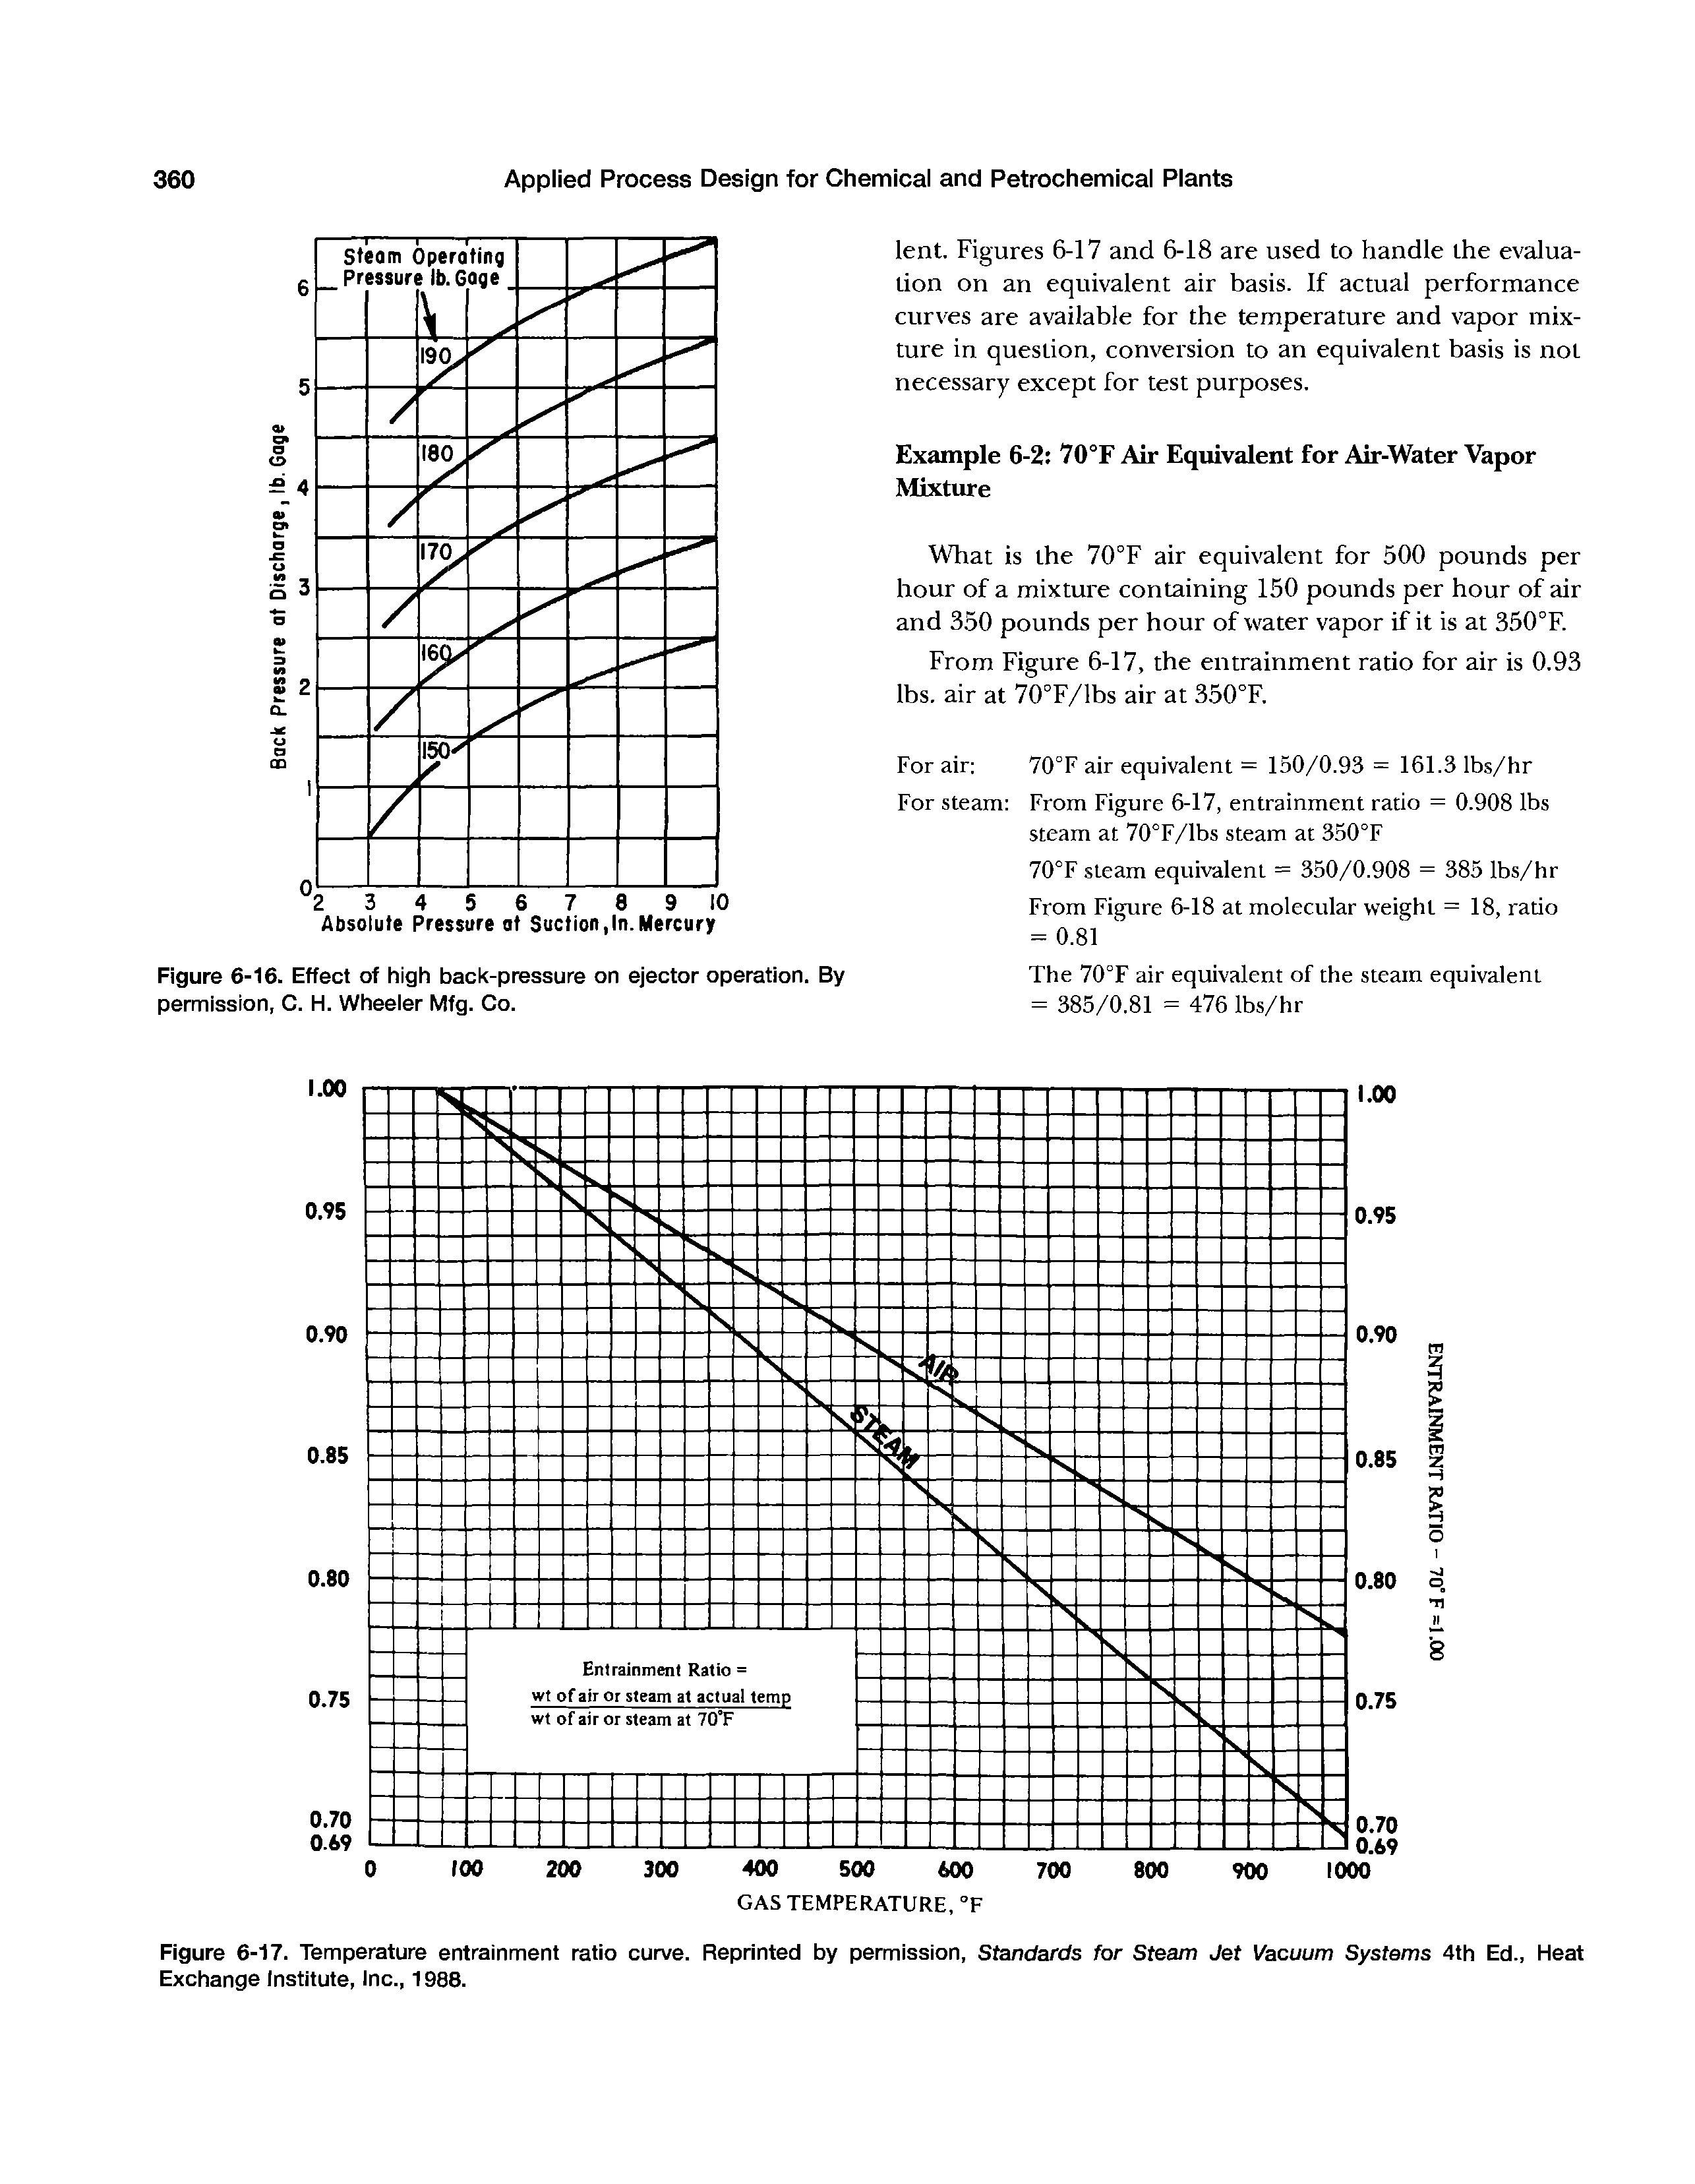 Figure 6-17. Temperature entrainment ratio curve. Reprinted by permission. Standards for Steam Jet Vacuum Systems 4th Ed., Heat Exchange Institute, Inc., 1988.